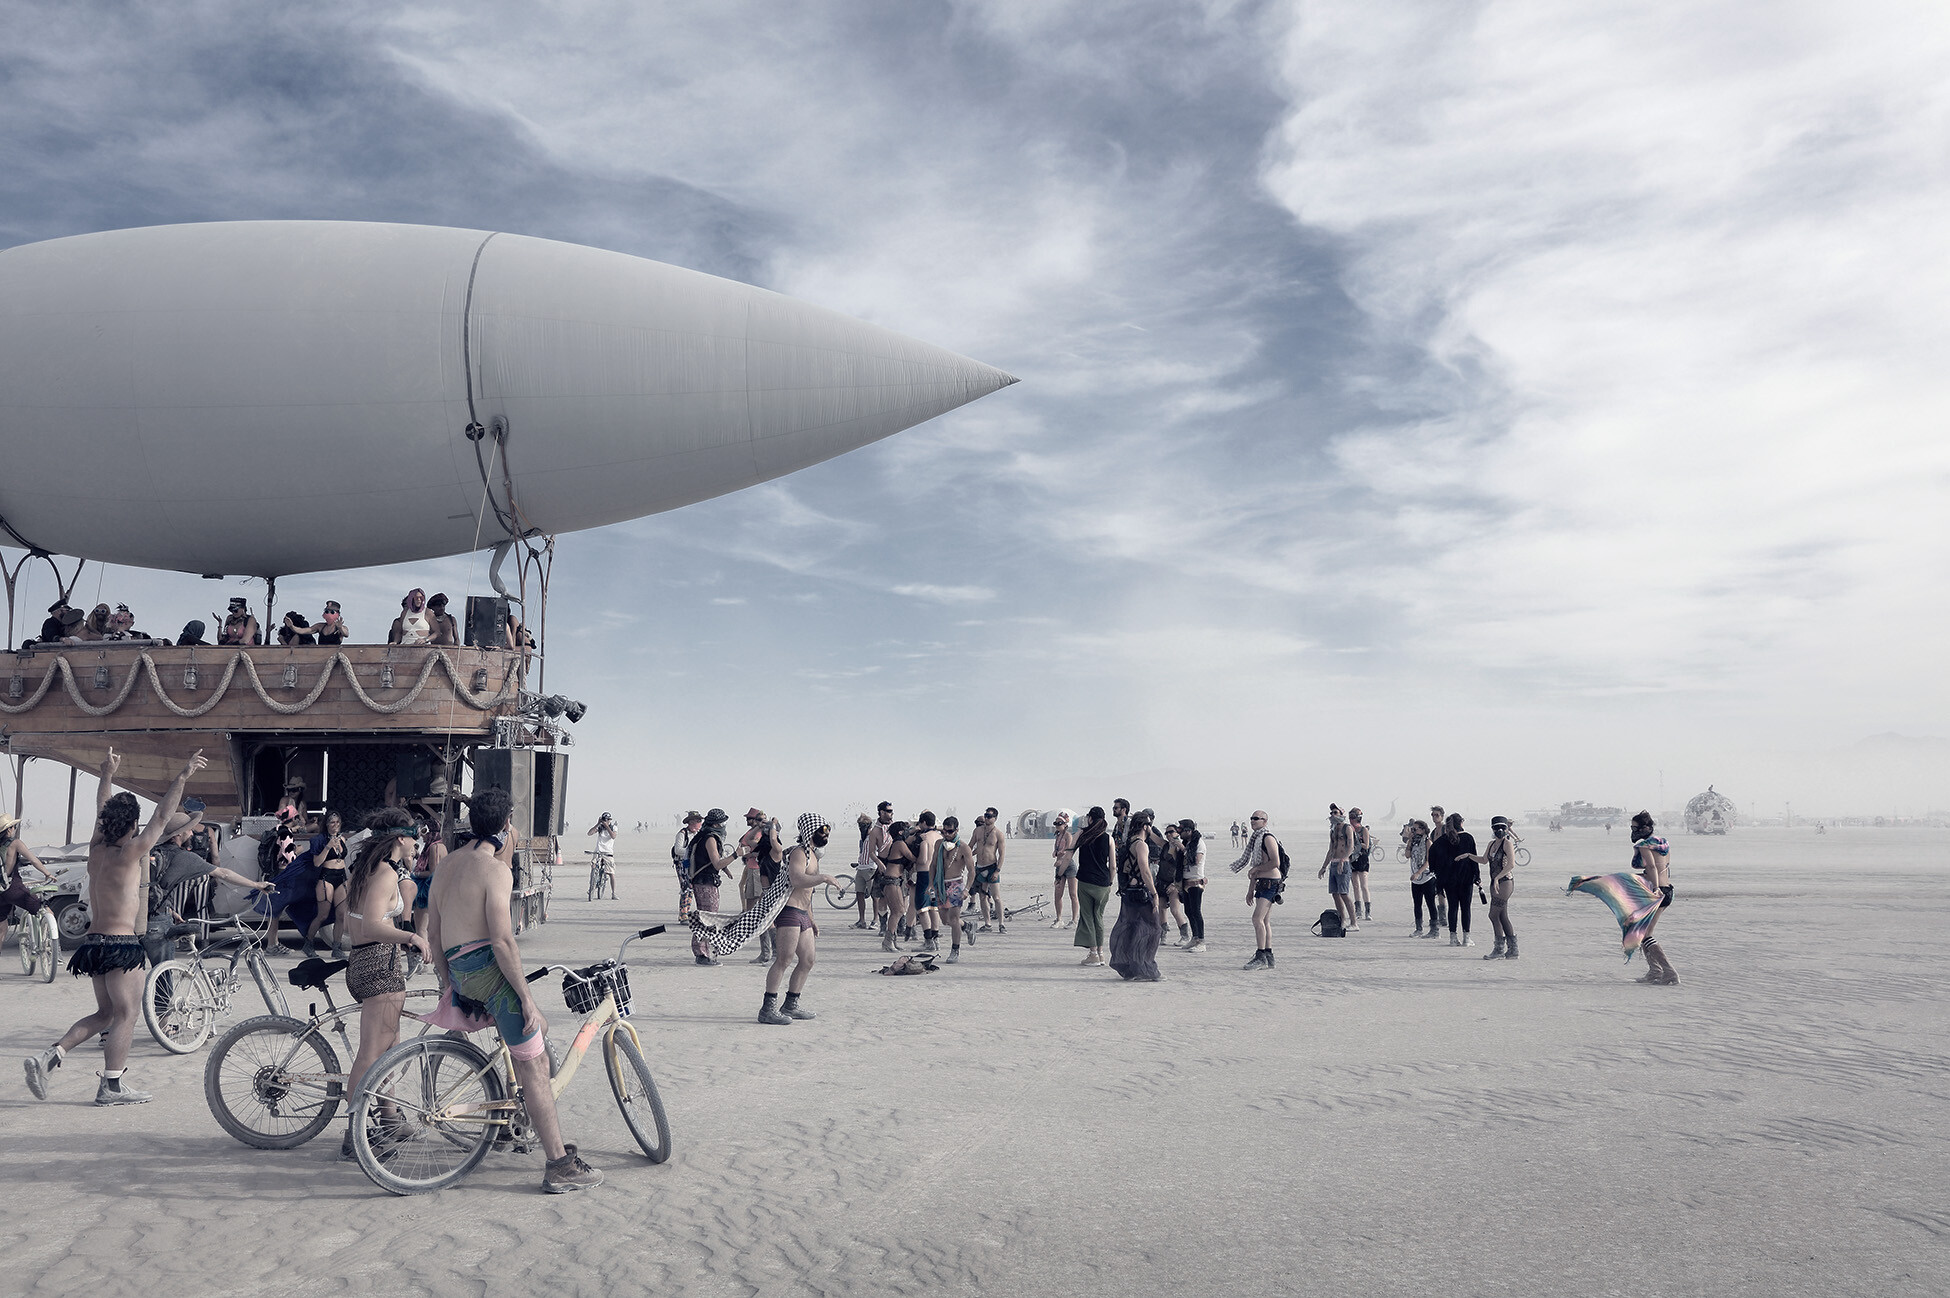 Burning Man attracts the weird and wonderful, the creative and generous. The come from far and wide and together they join to make Burning Man the most unique place on earth. Check out the amazing portraits of Burning Man from Justin Hession photography. An Australian portrait photographer working out of Zurich, Switzerland